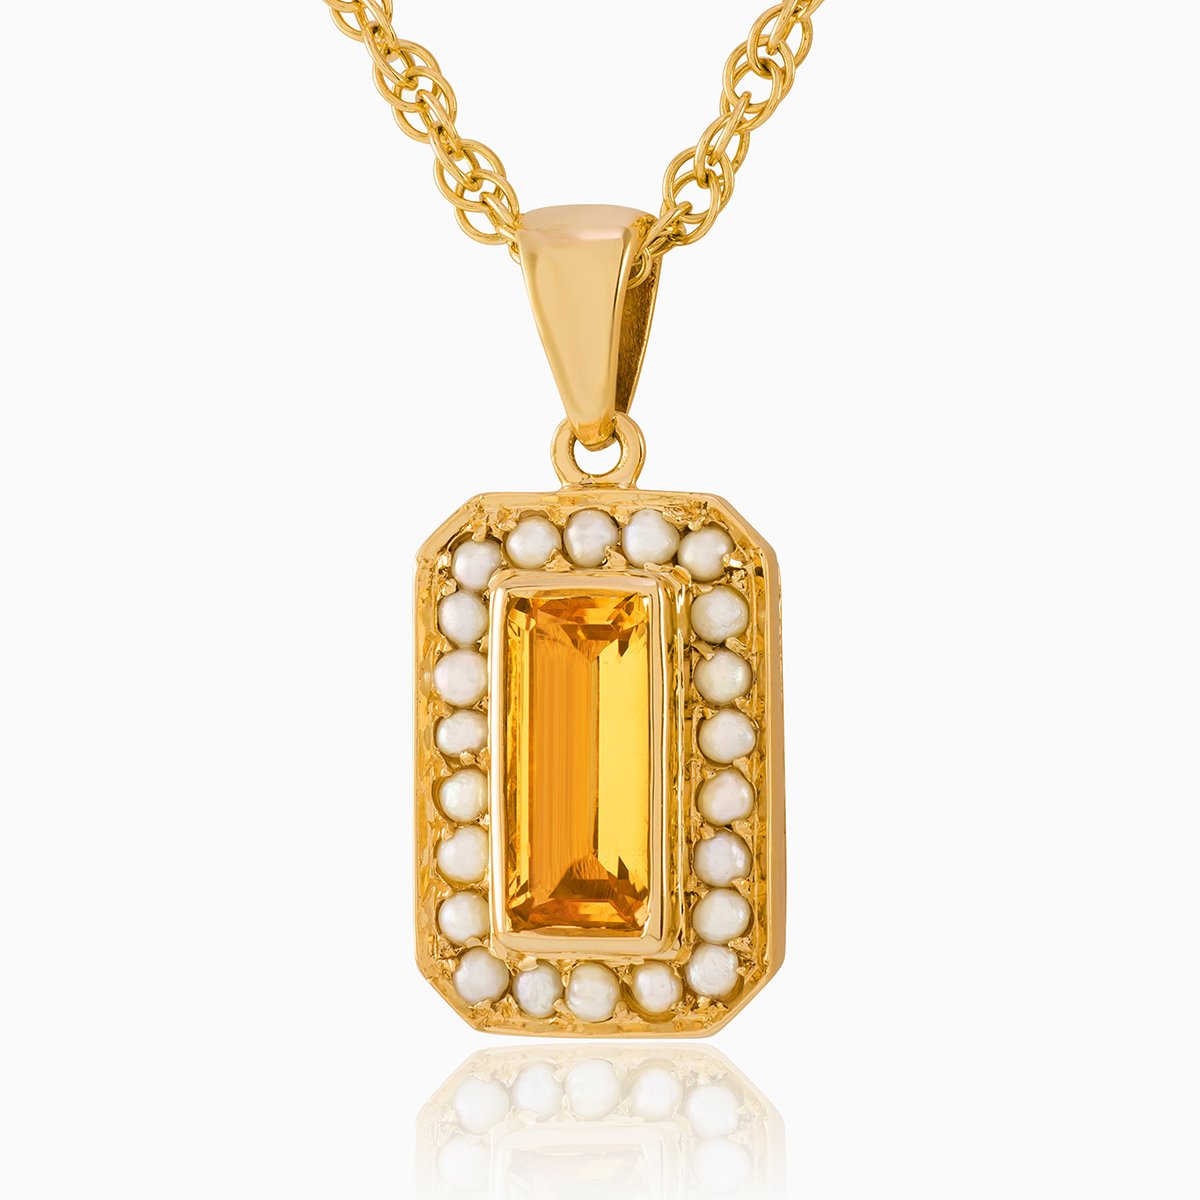 9 ct gold tabular shaped locket set with a citrine and seed pearls ona 9 ct gold rope chain